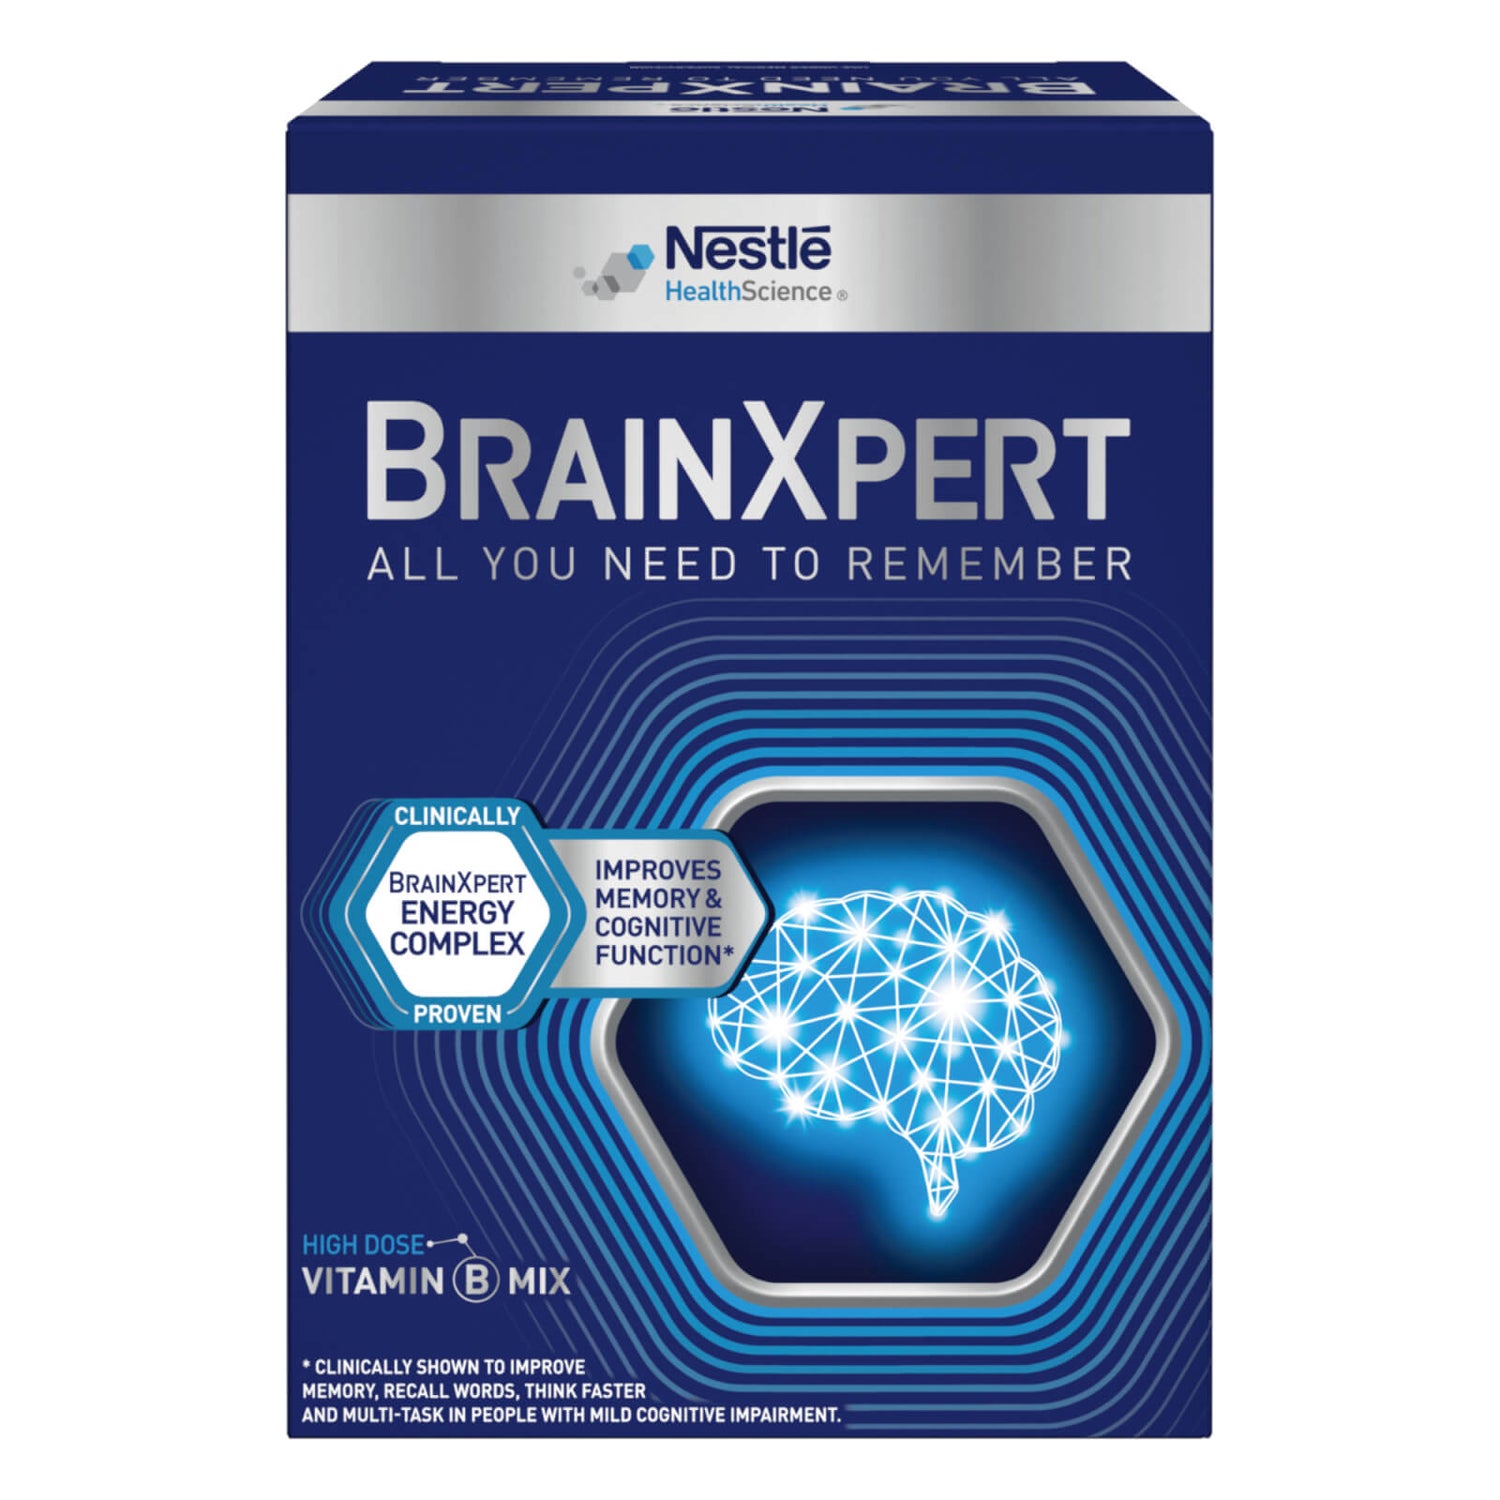 BrainXpert – Improves Memory and Cognitive Function - 1 Month Pack - 56 x 25g Sachets